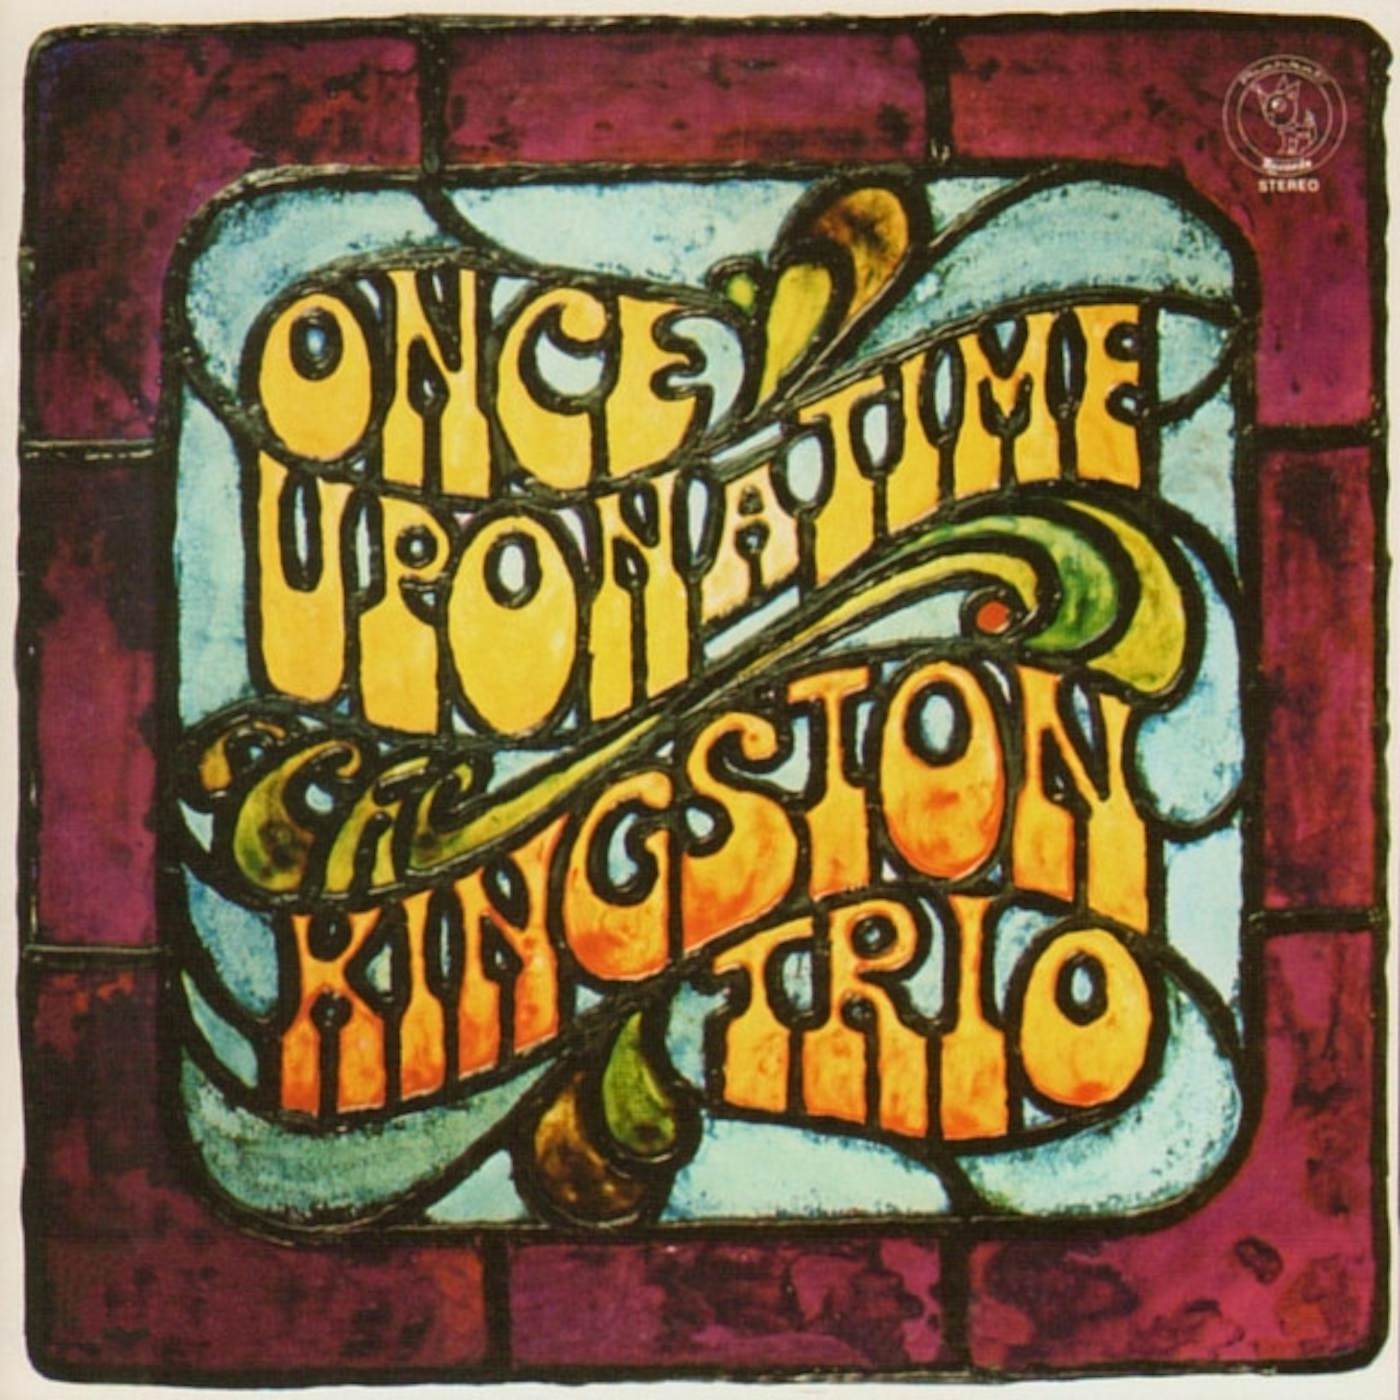 The Kingston Trio ONCE UPON A TIME CD